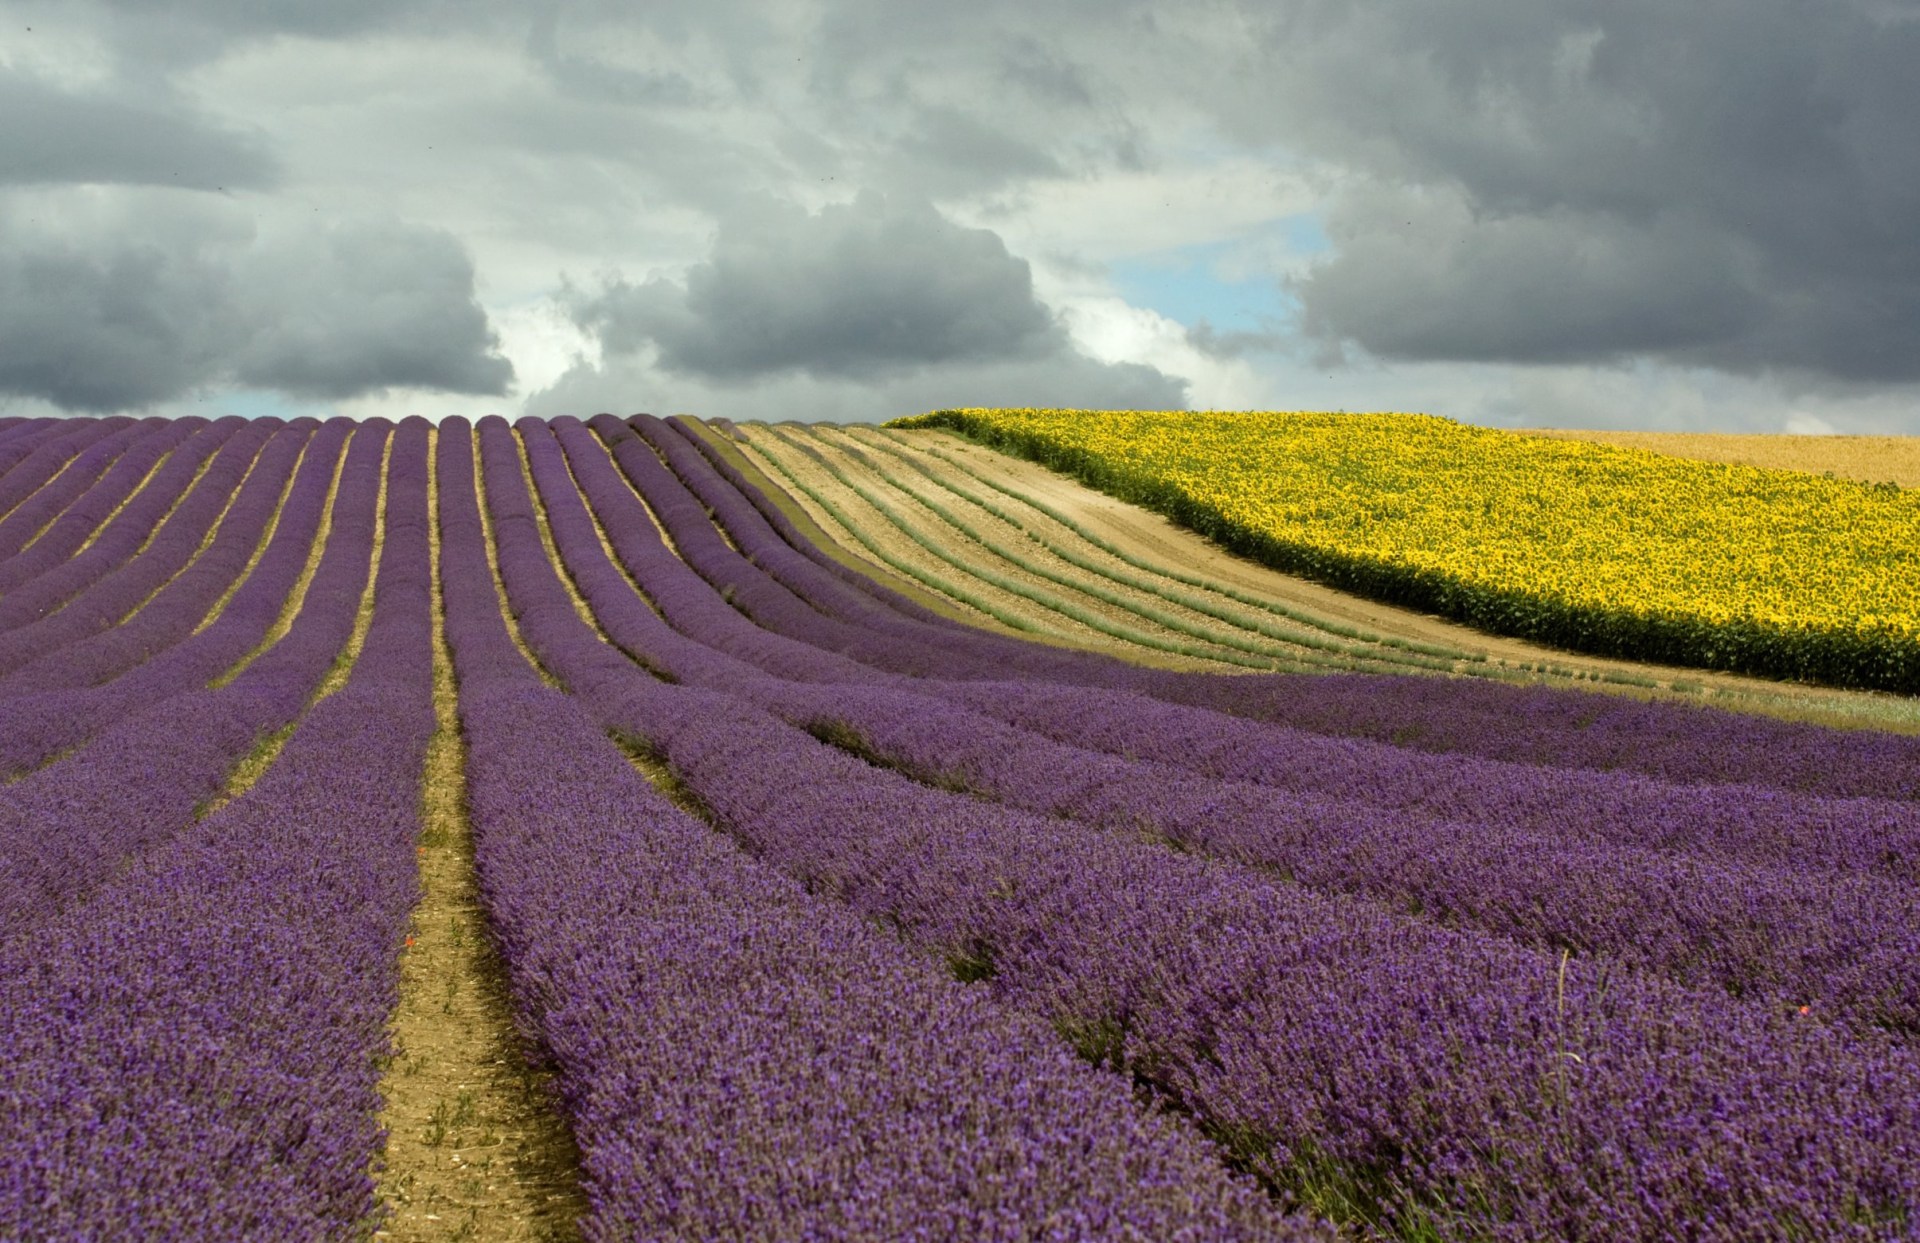 you can see some of the most beautiful flower fields on earth right here in the uk